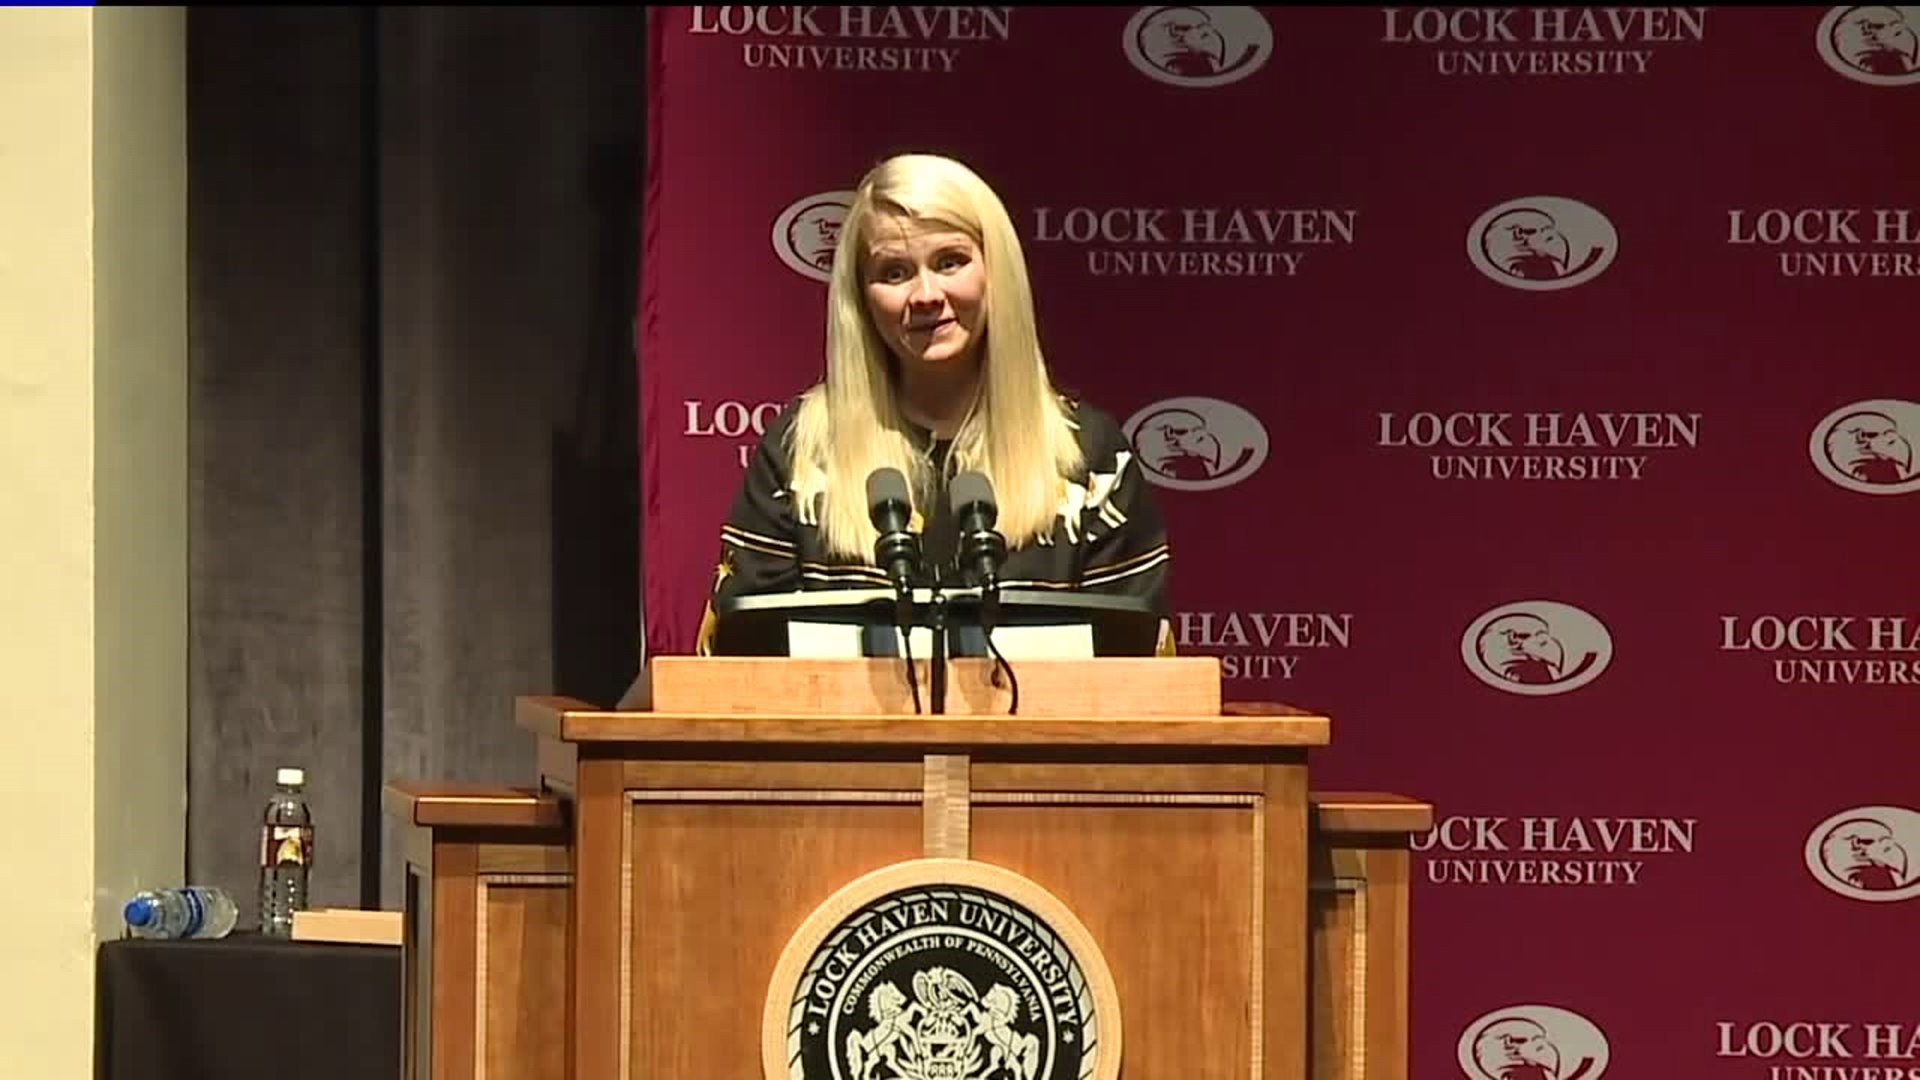 Elizabeth Smart Speaks at Lock Haven University the Day One of her Captors is Released From Prison